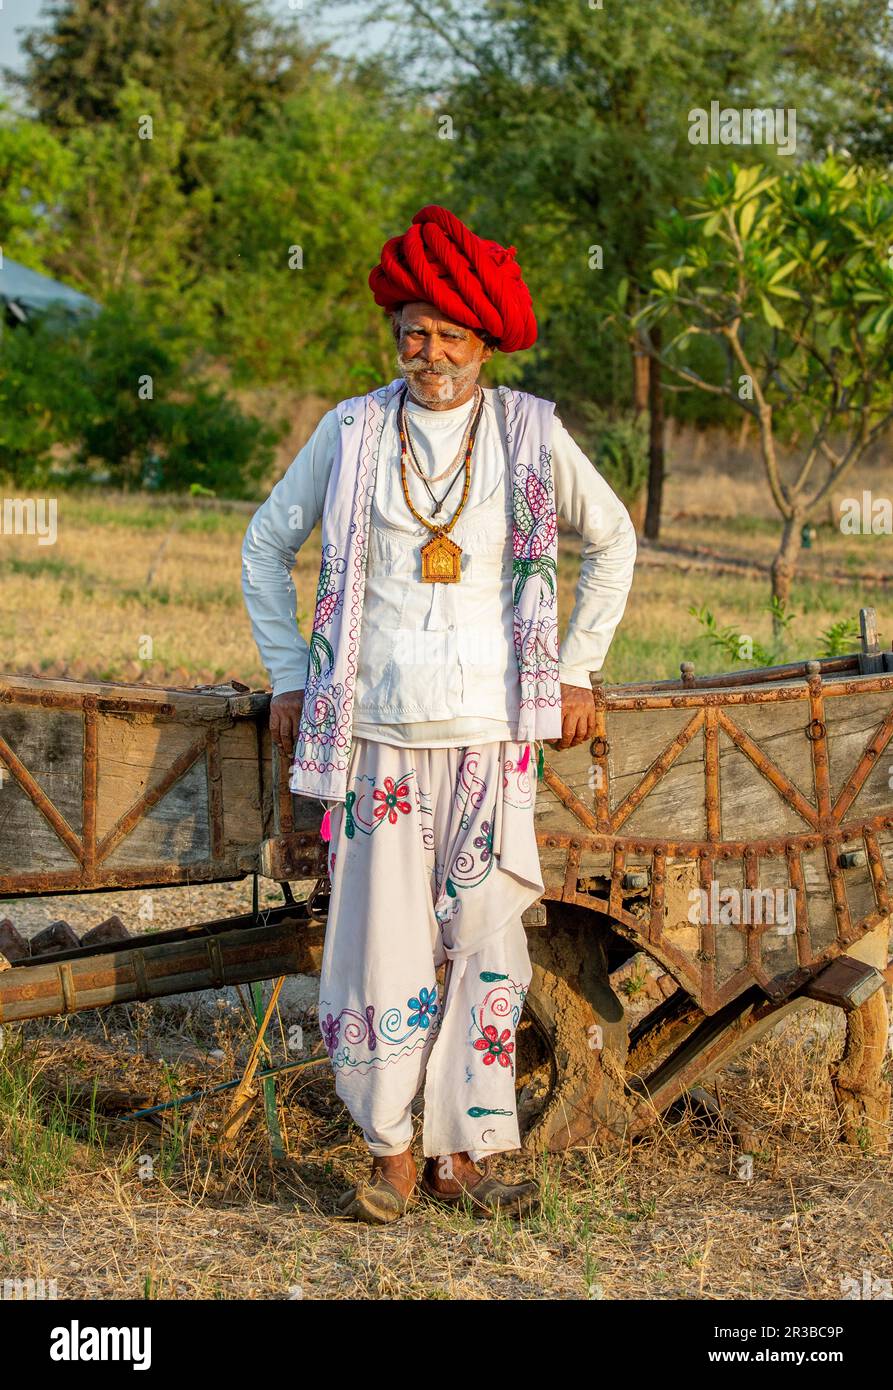 Portrait of a man of the Rabari ethnic group in a national headdress and traditional dress with national ornaments. Stock Photo